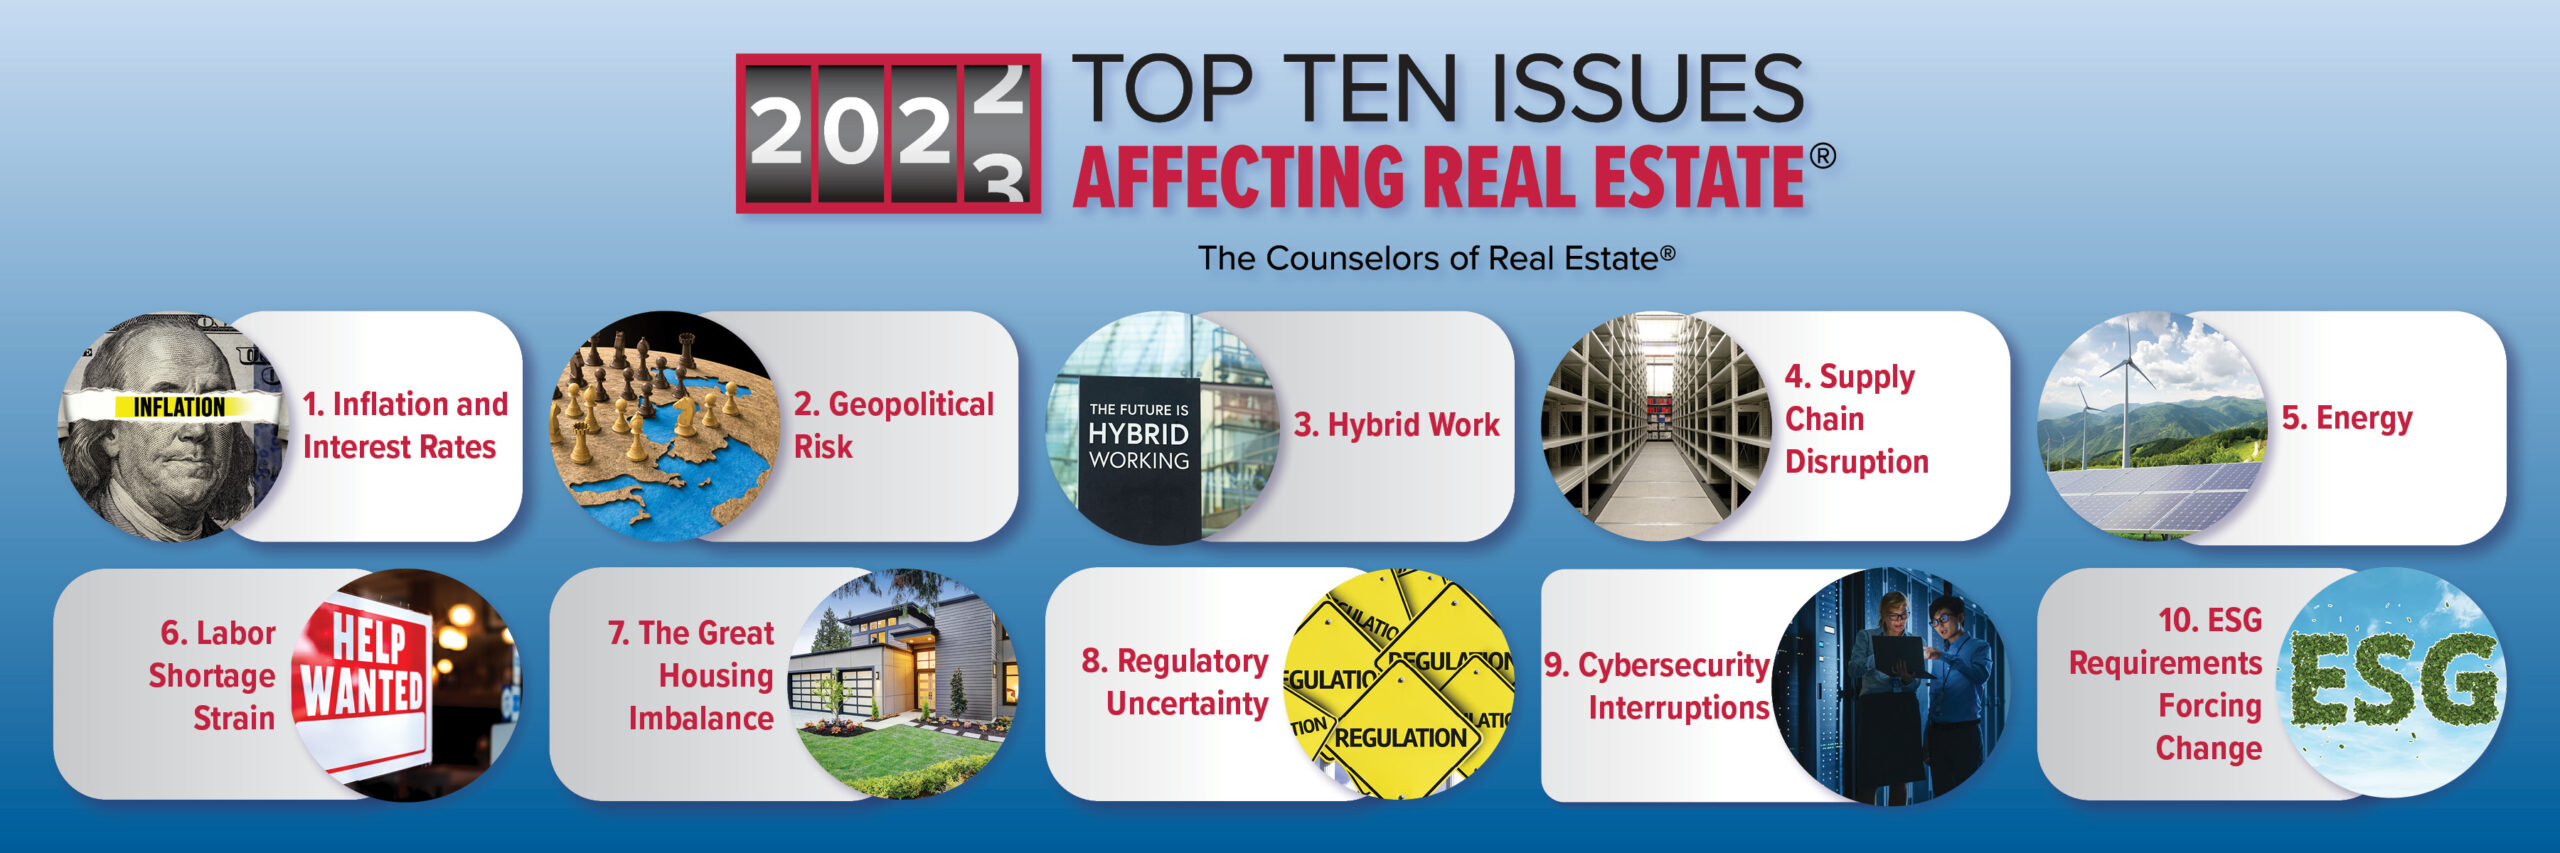 2022-23-Top-Ten-Issues-Homepage-Graphic